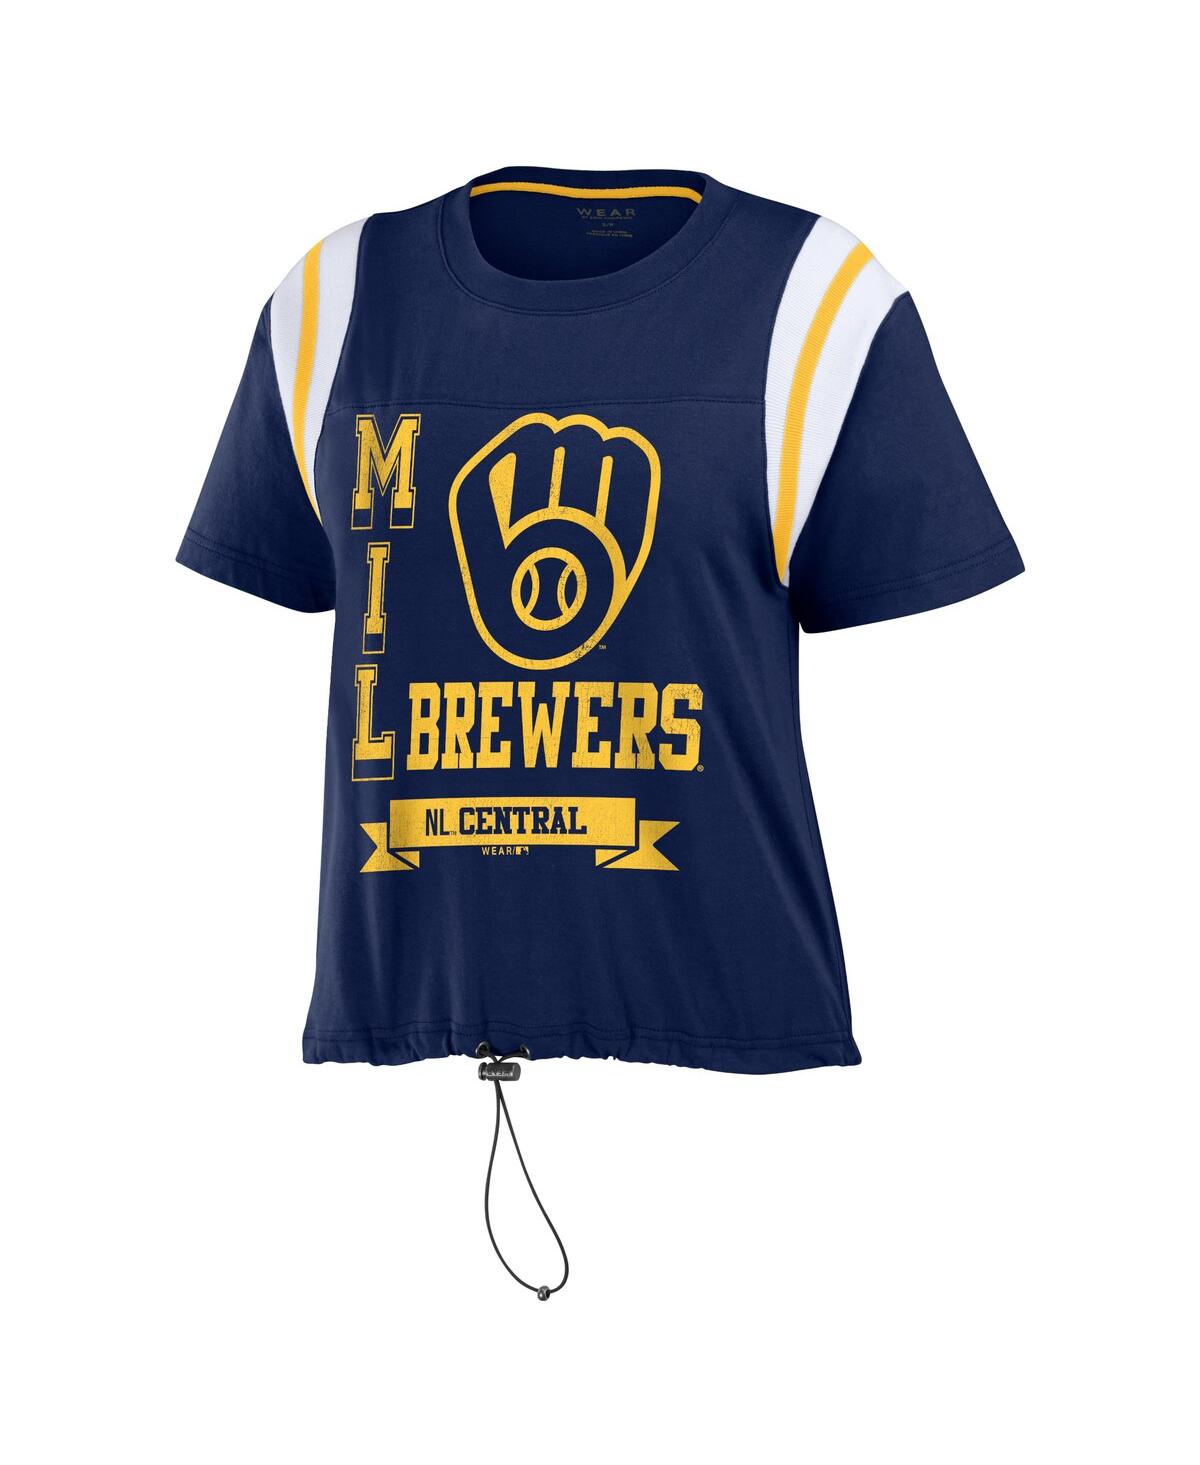 Shop Wear By Erin Andrews Women's  Navy Distressed Milwaukee Brewers Cinched Colorblock T-shirt